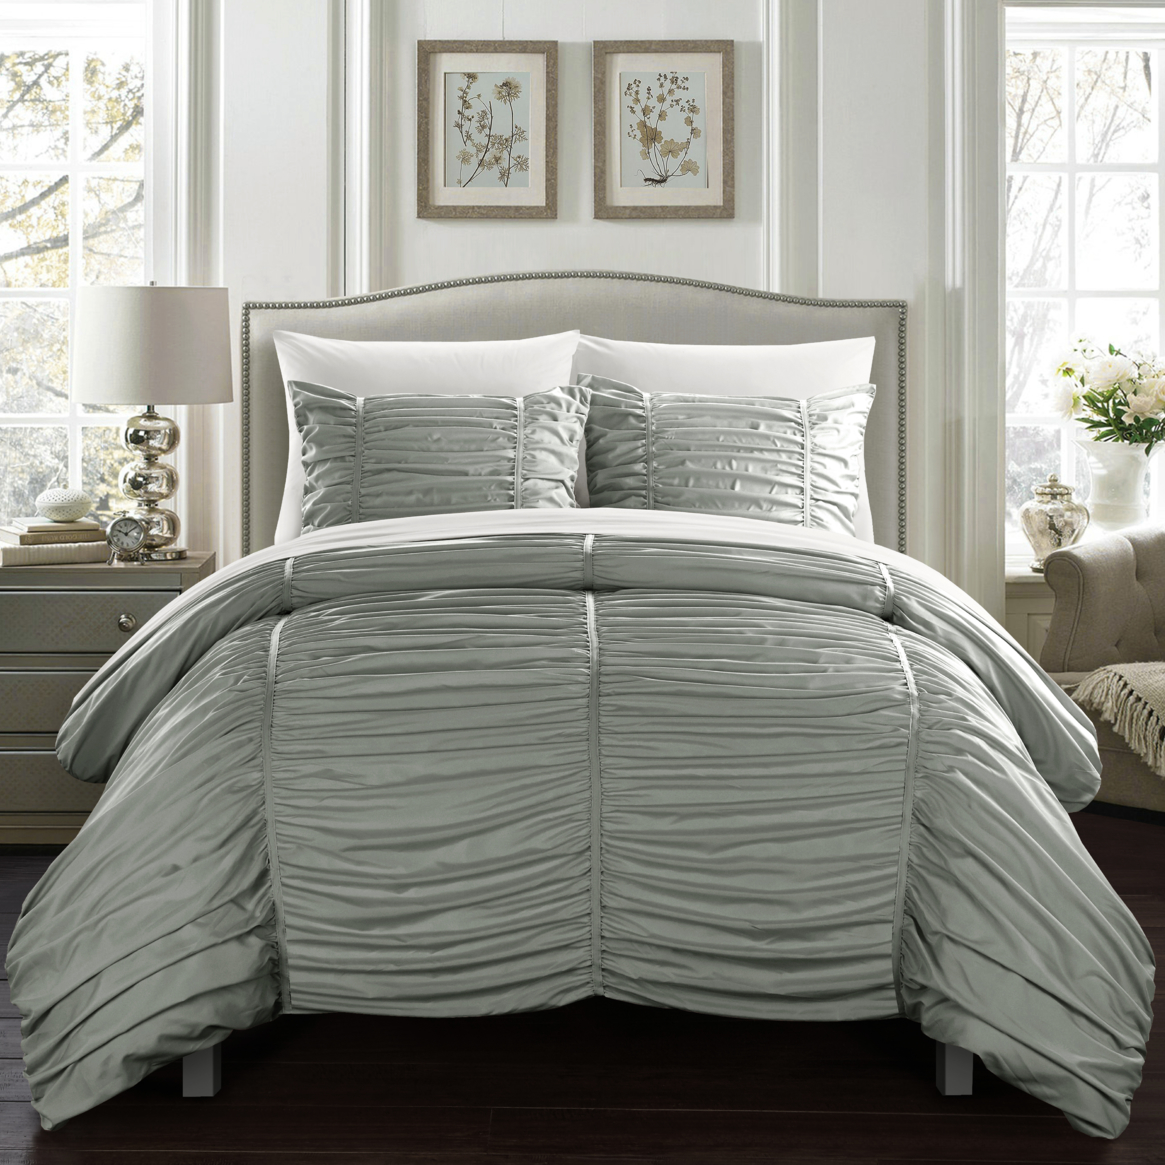 Kleia 7 Or 5 Piece Comforter Set Contemporary Striped Ruched Ruffled Design Bed In A Bag - Grey, Twin